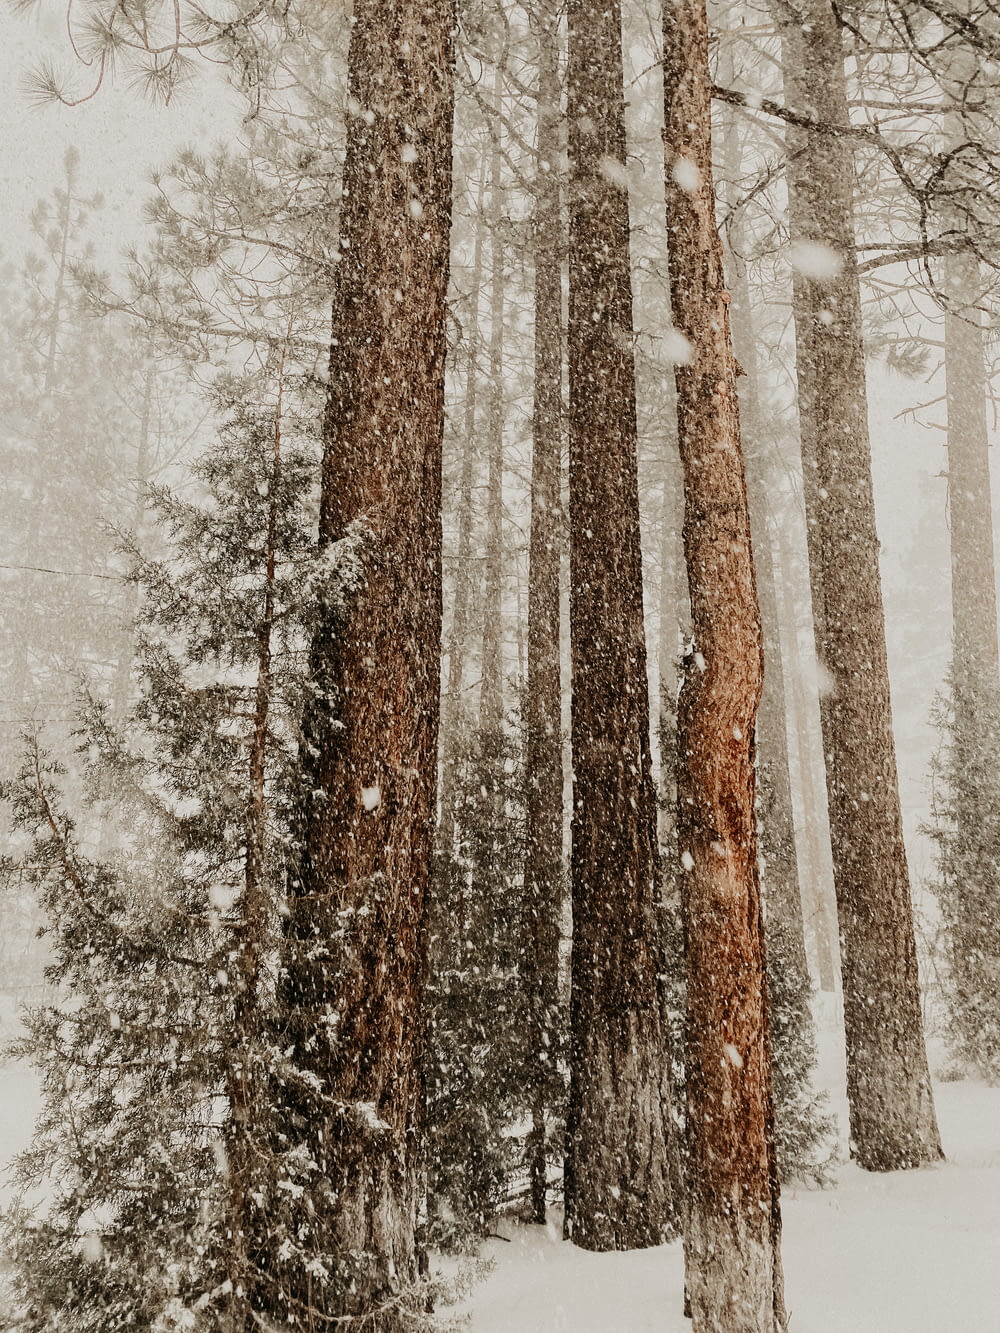 a snow covered forest filled with lots of tall trees